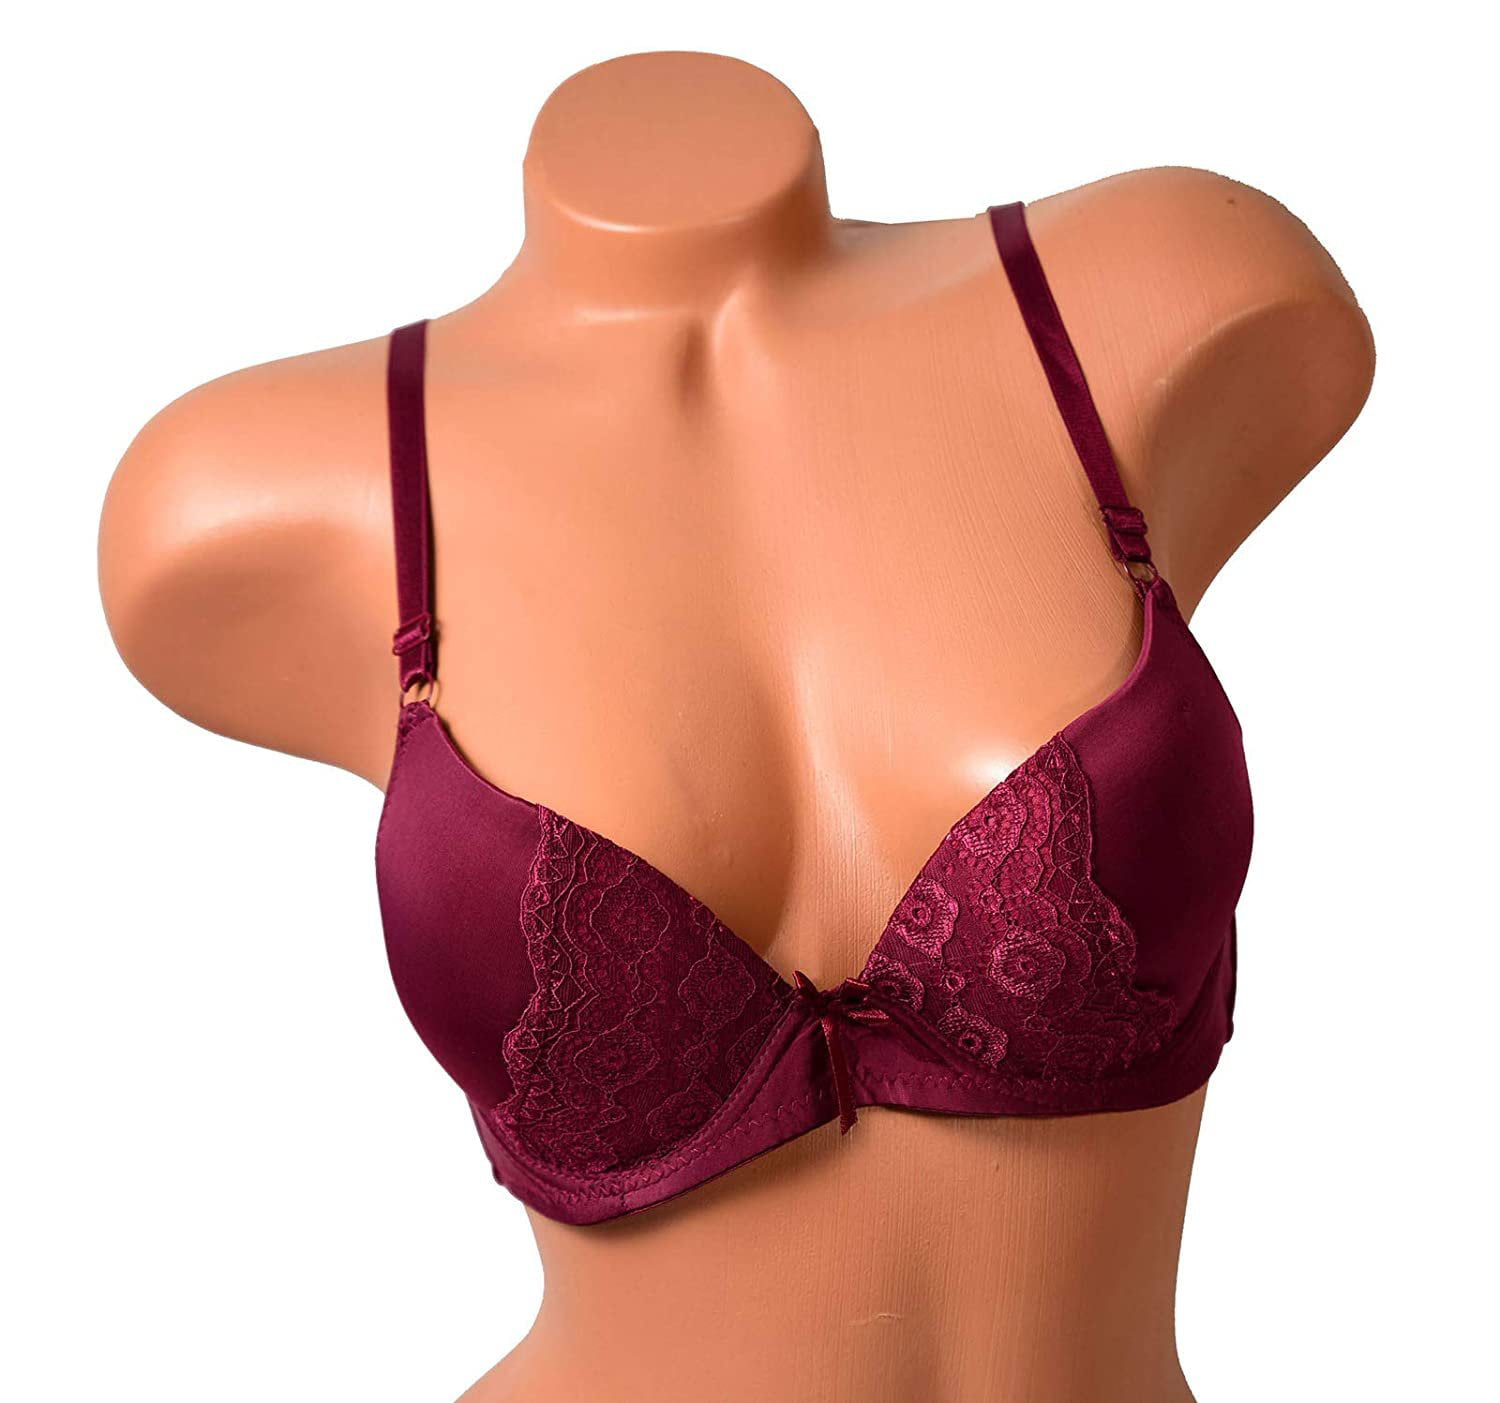 Women Bras 6 Pack of Double Pushup Lace Bra B cup C cup Size 34C (9903) 